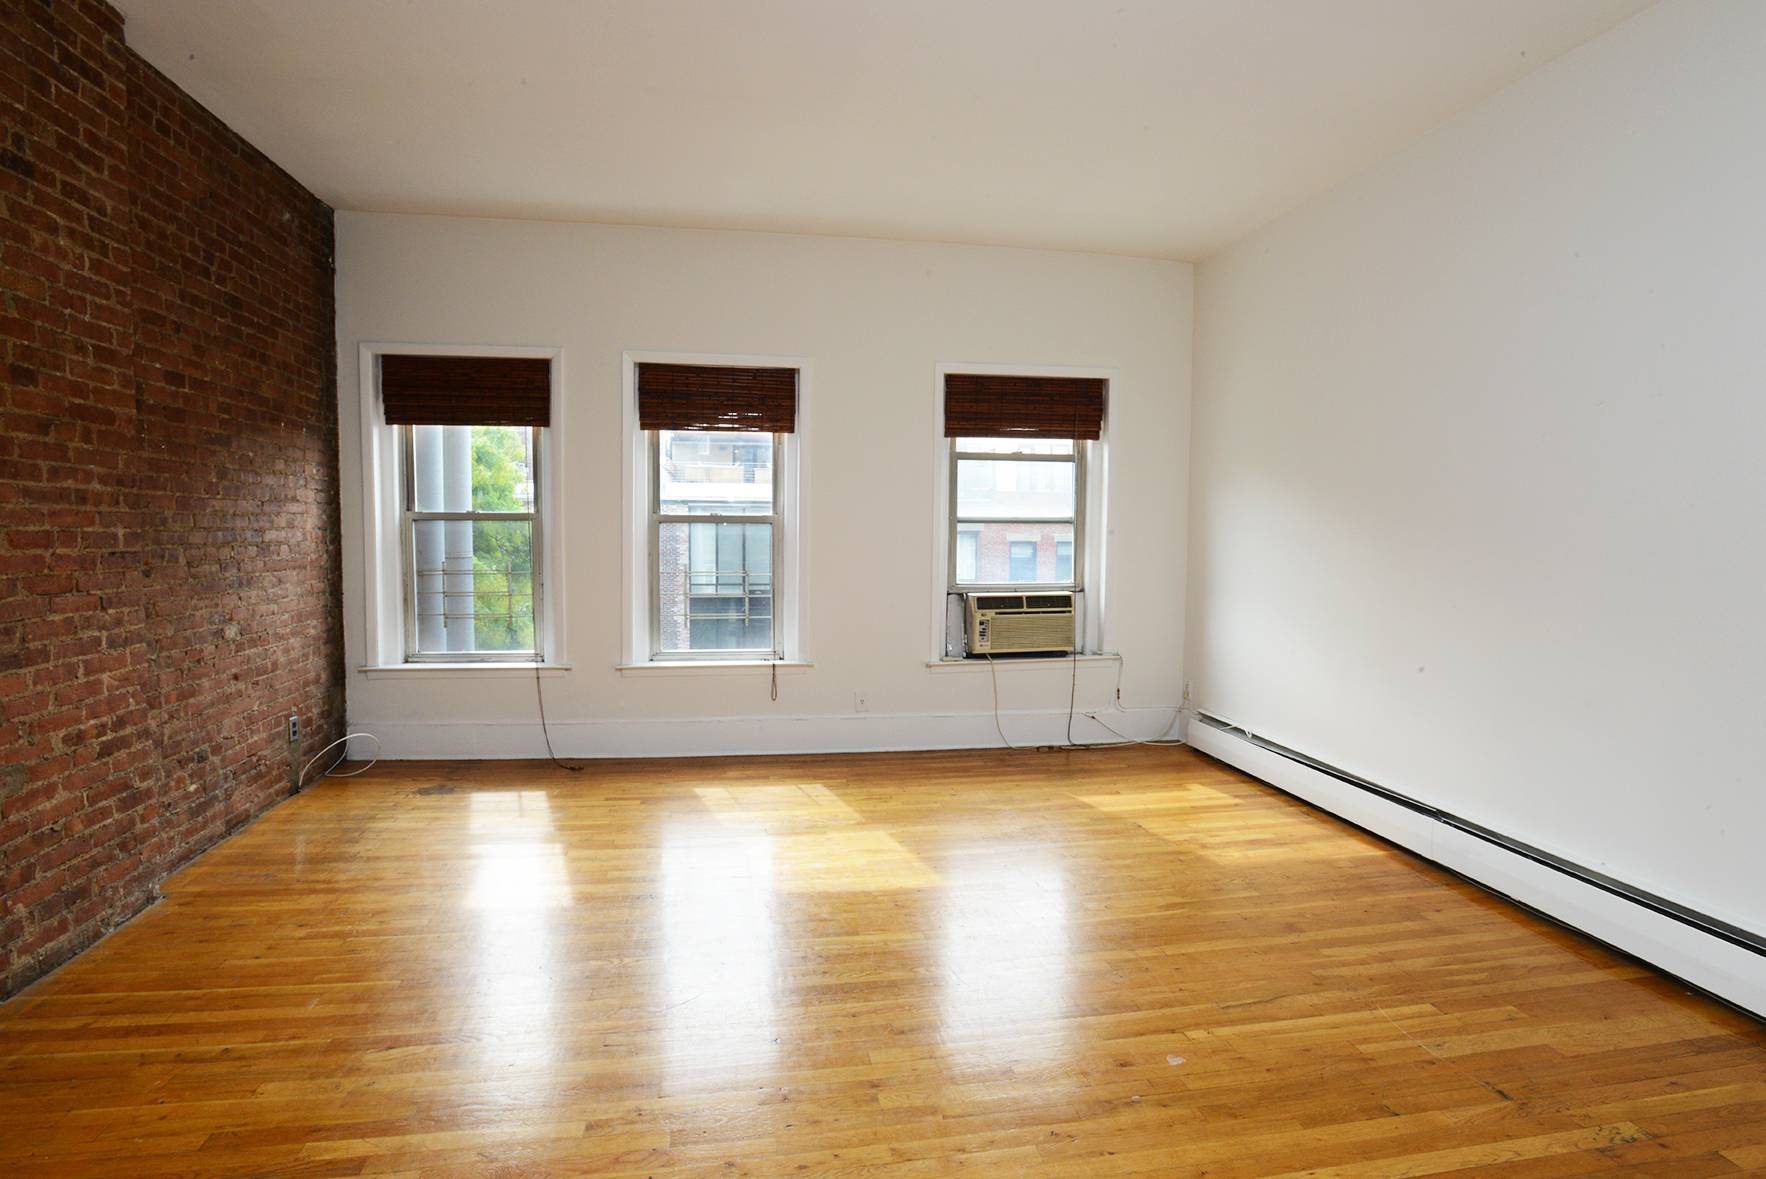 Amazing 2 Bedroom Brownstone Apartment, Upper West Side, Next to Central Park, 1 Block from Subway! Great Space, Lots of Light, Incredible Value!!